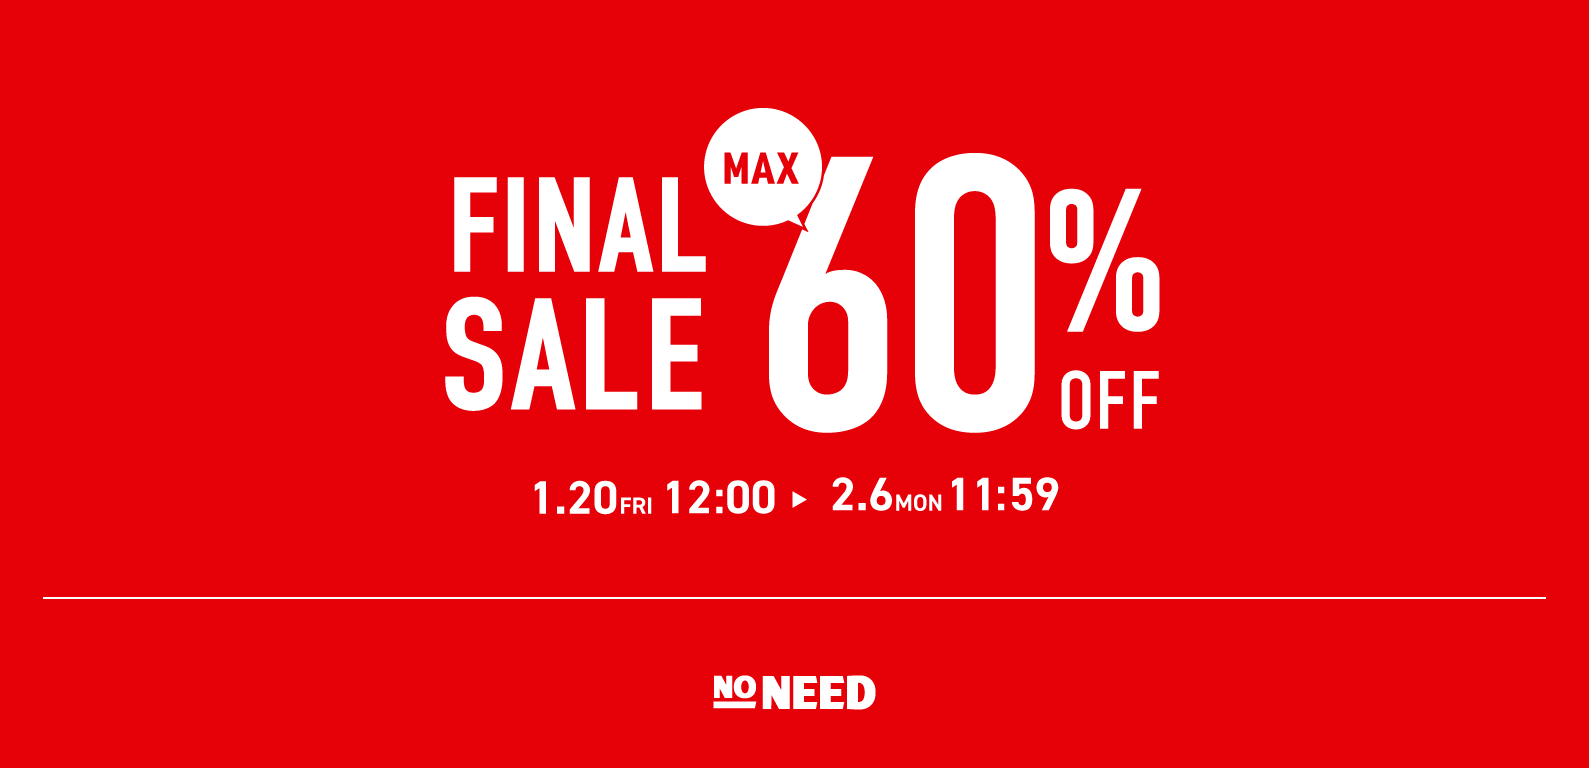 NONEED | FINAL SALE